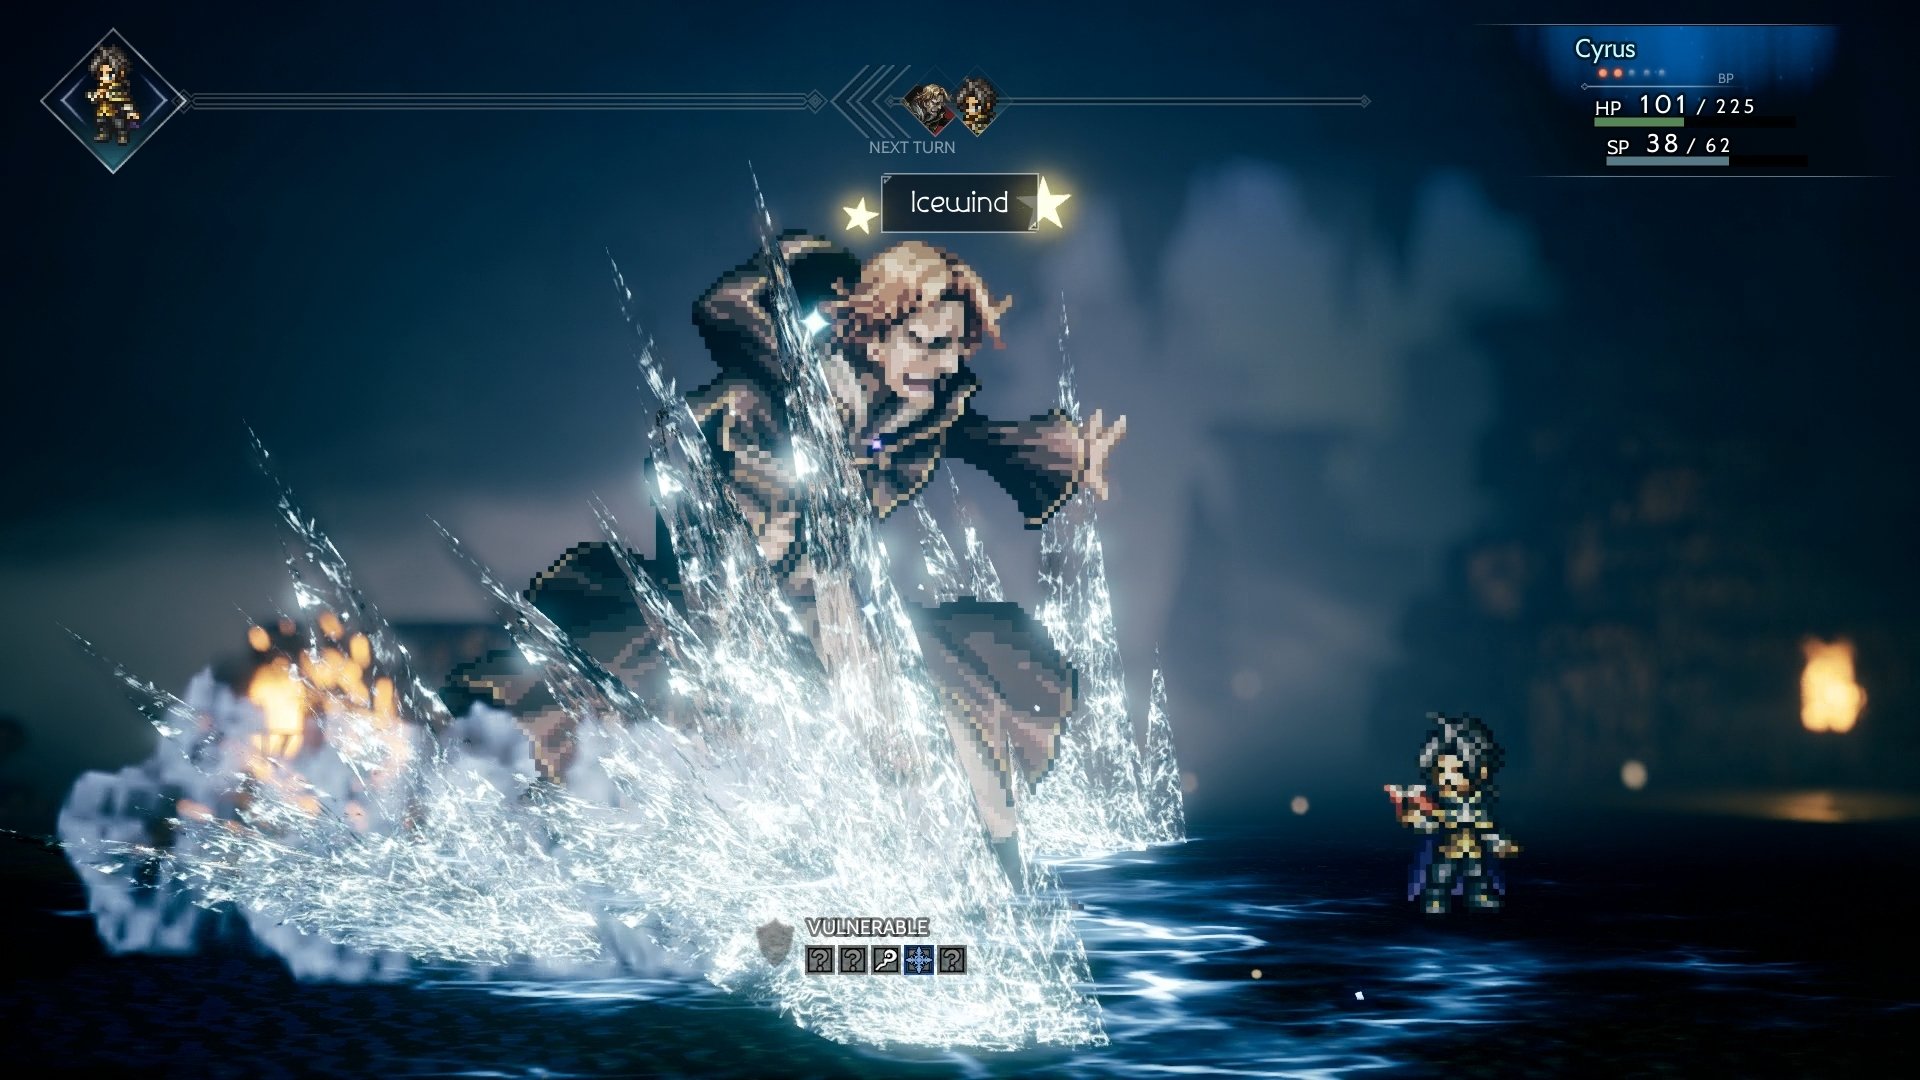 Octopath Traveler is getting a mobile prequel and it looks pretty